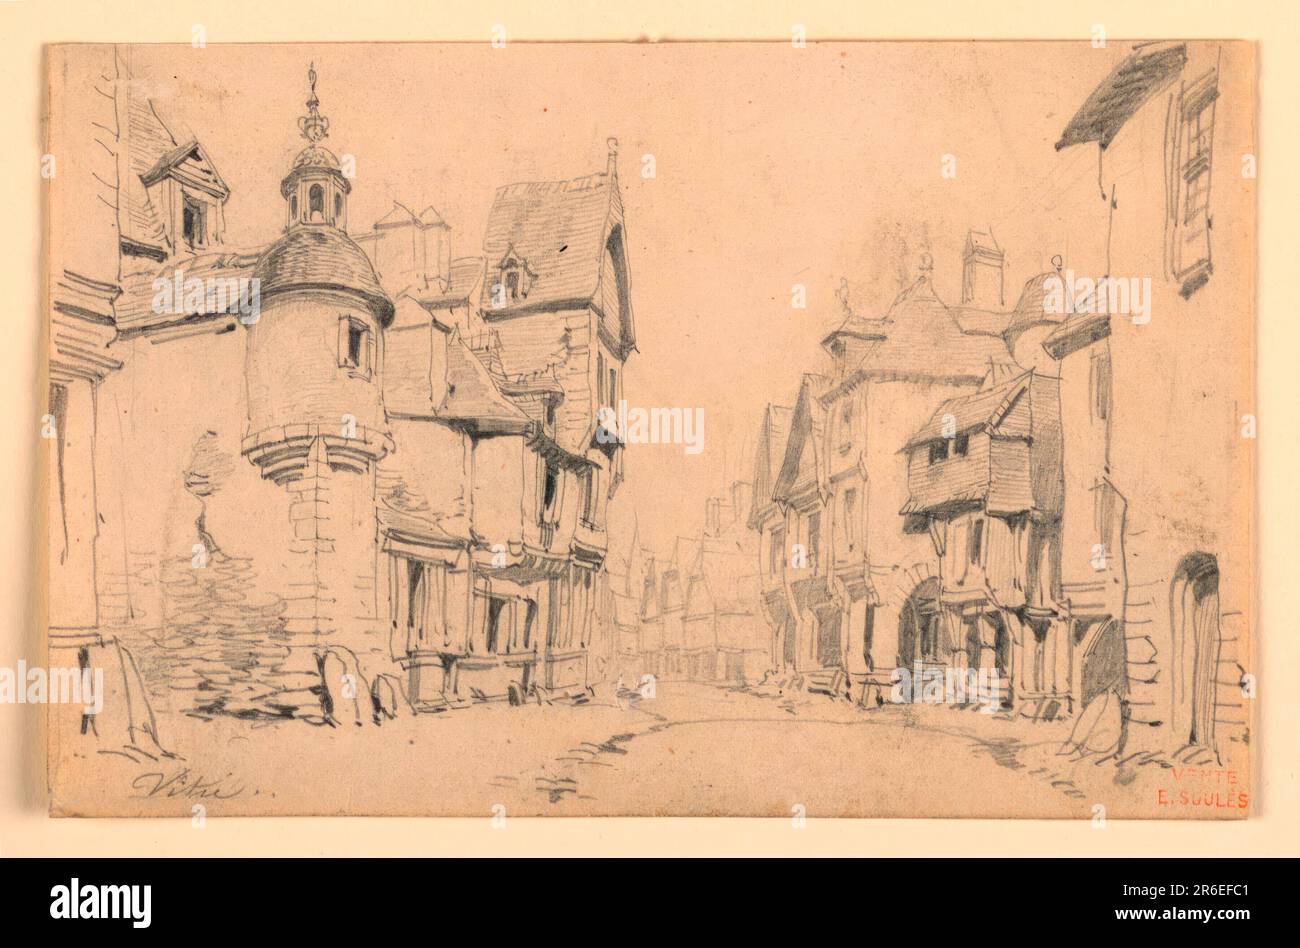 The street of a town, winding into the background. Writing in the lower left corner: Vitri. Graphite on paper. Date: 1840-1860. Museum: Cooper Hewitt, Smithsonian Design Museum. Stock Photo